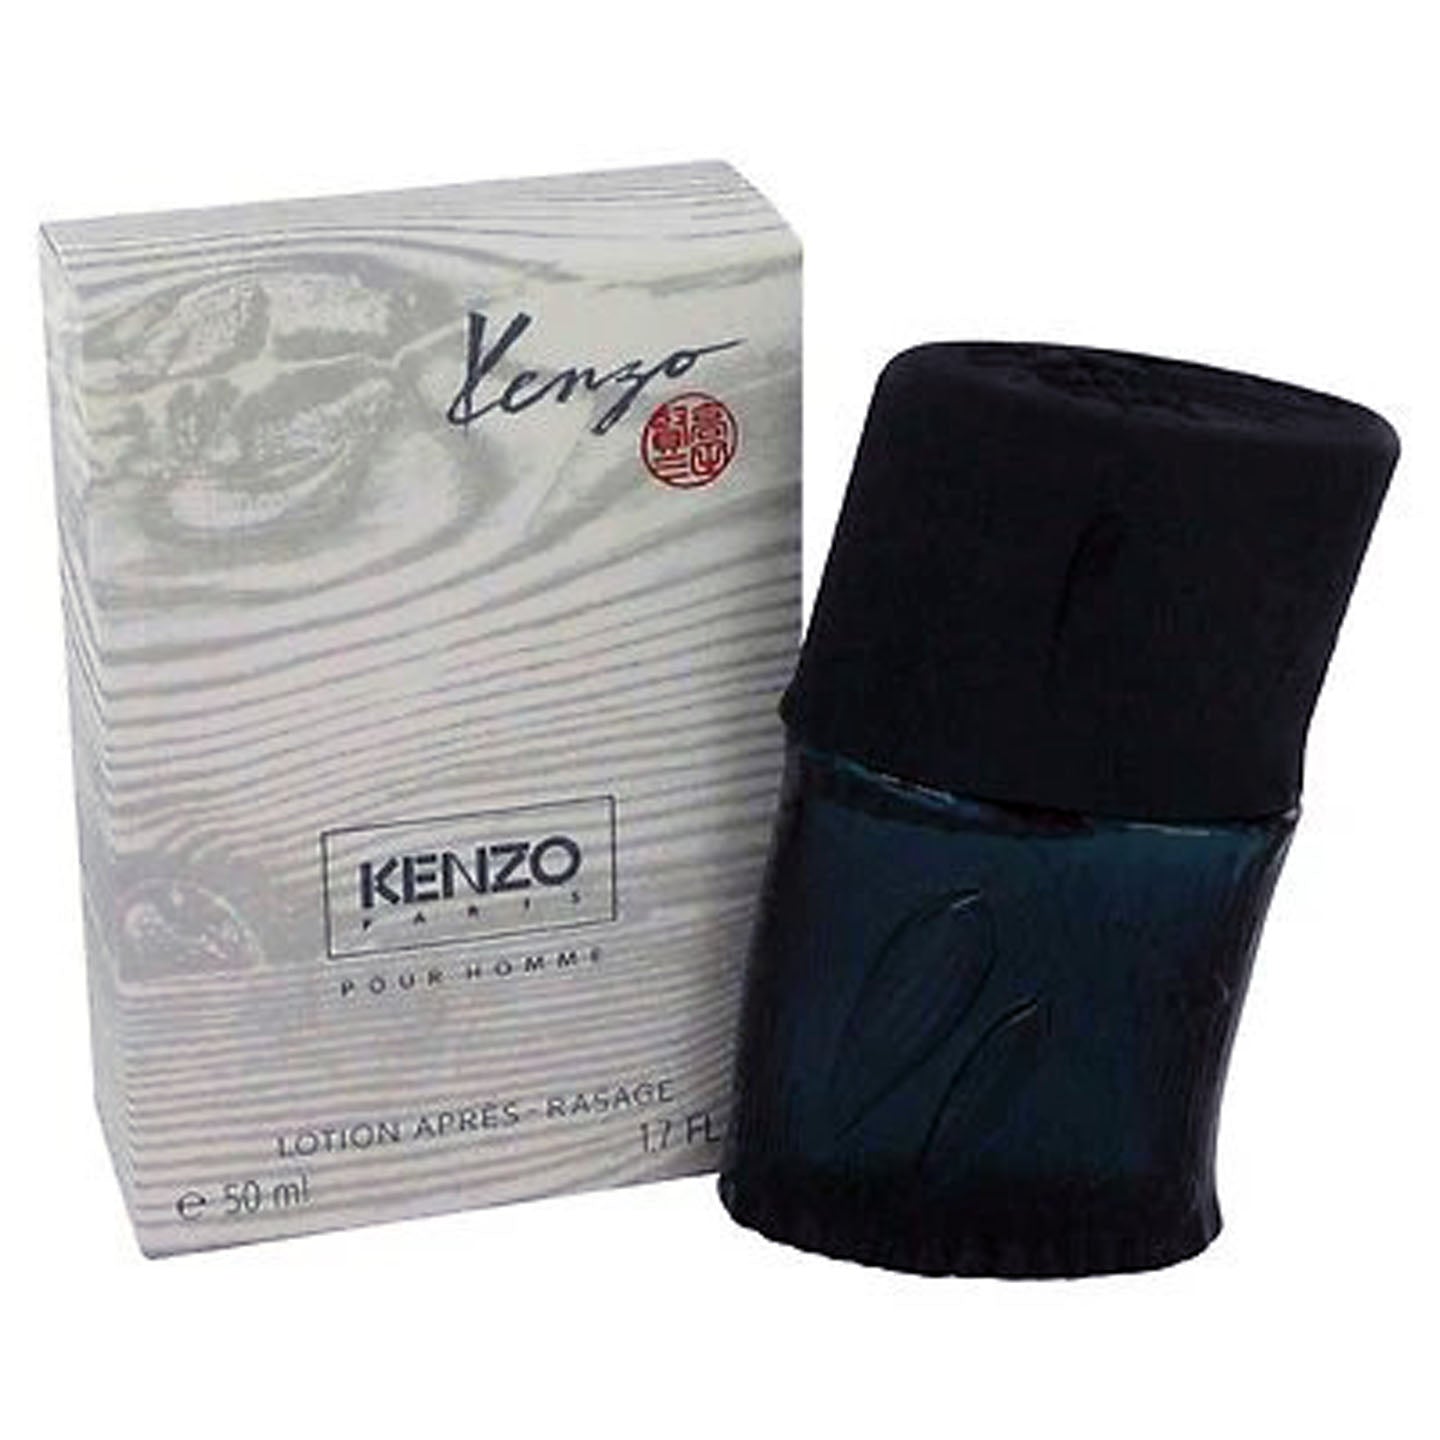 Kenzo Pour Homme After Shave Lotion 